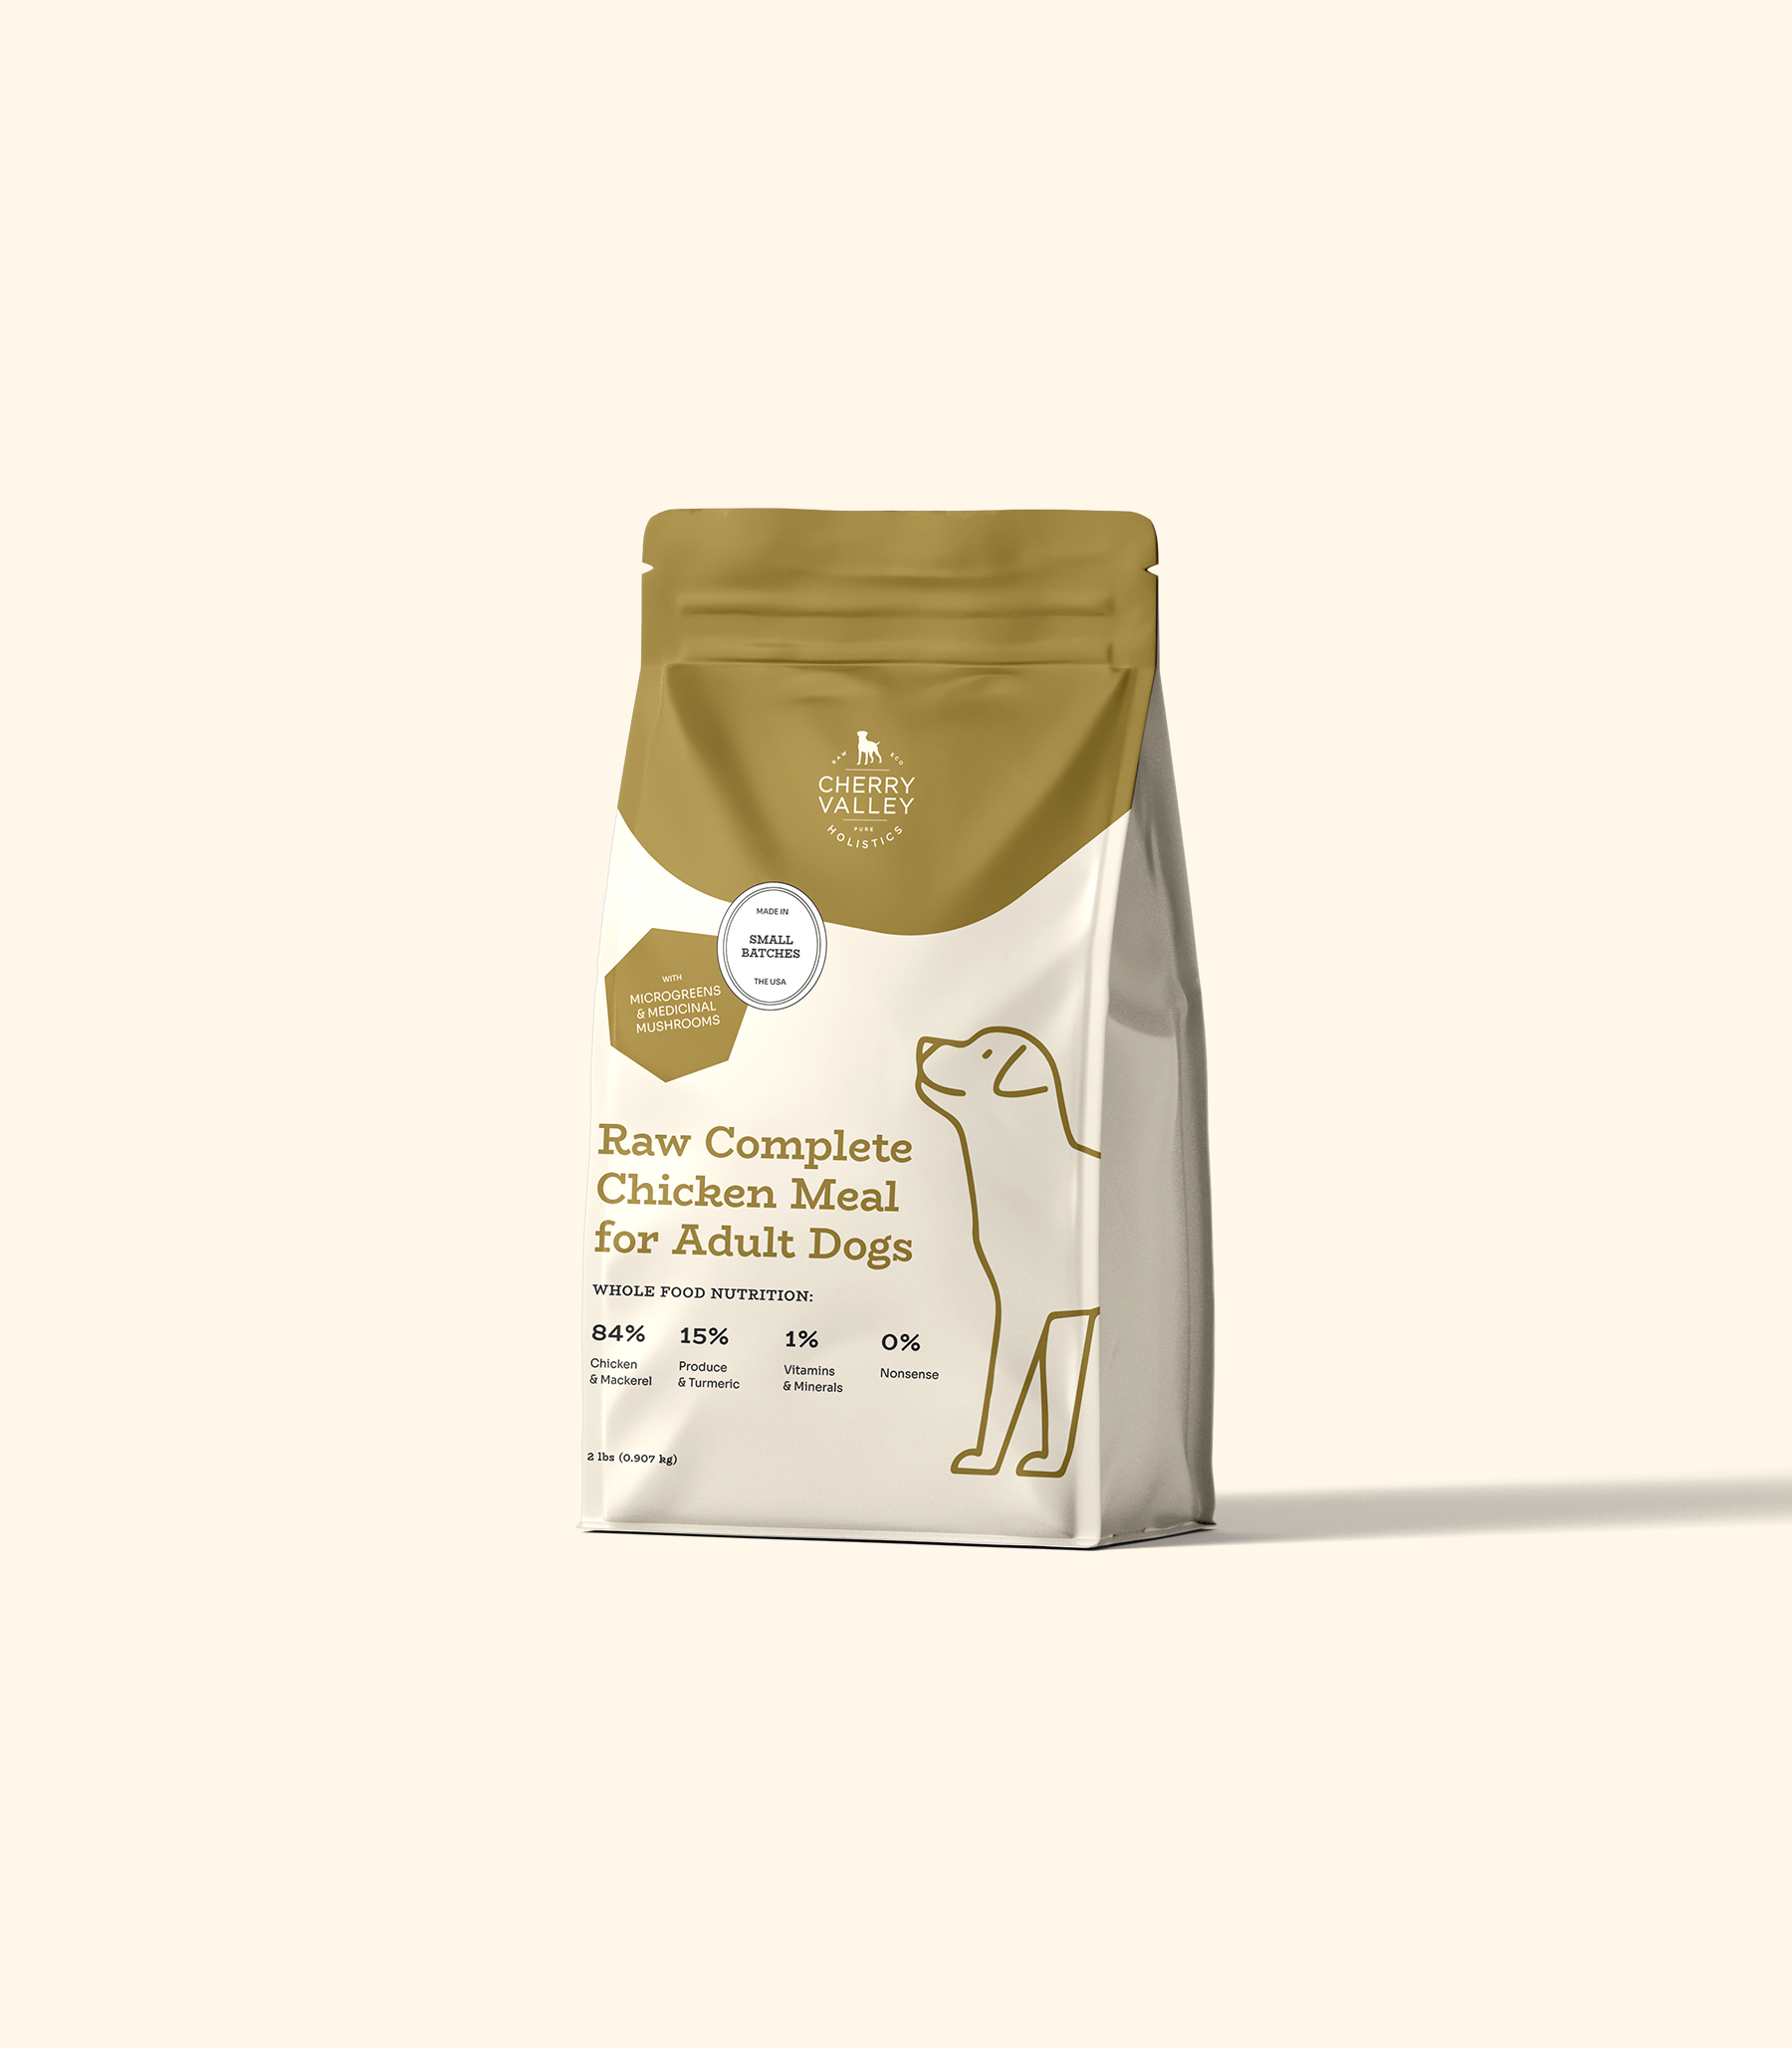 Raw Complete Chicken Meal for Adult Dogs